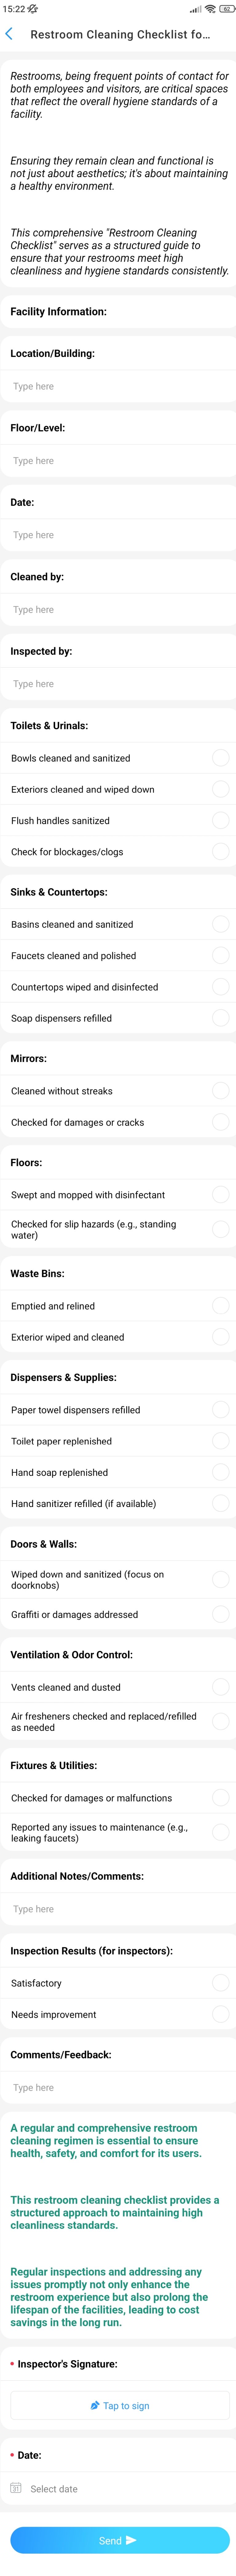 Restroom Cleaning Checklist for Cleaning Businesses